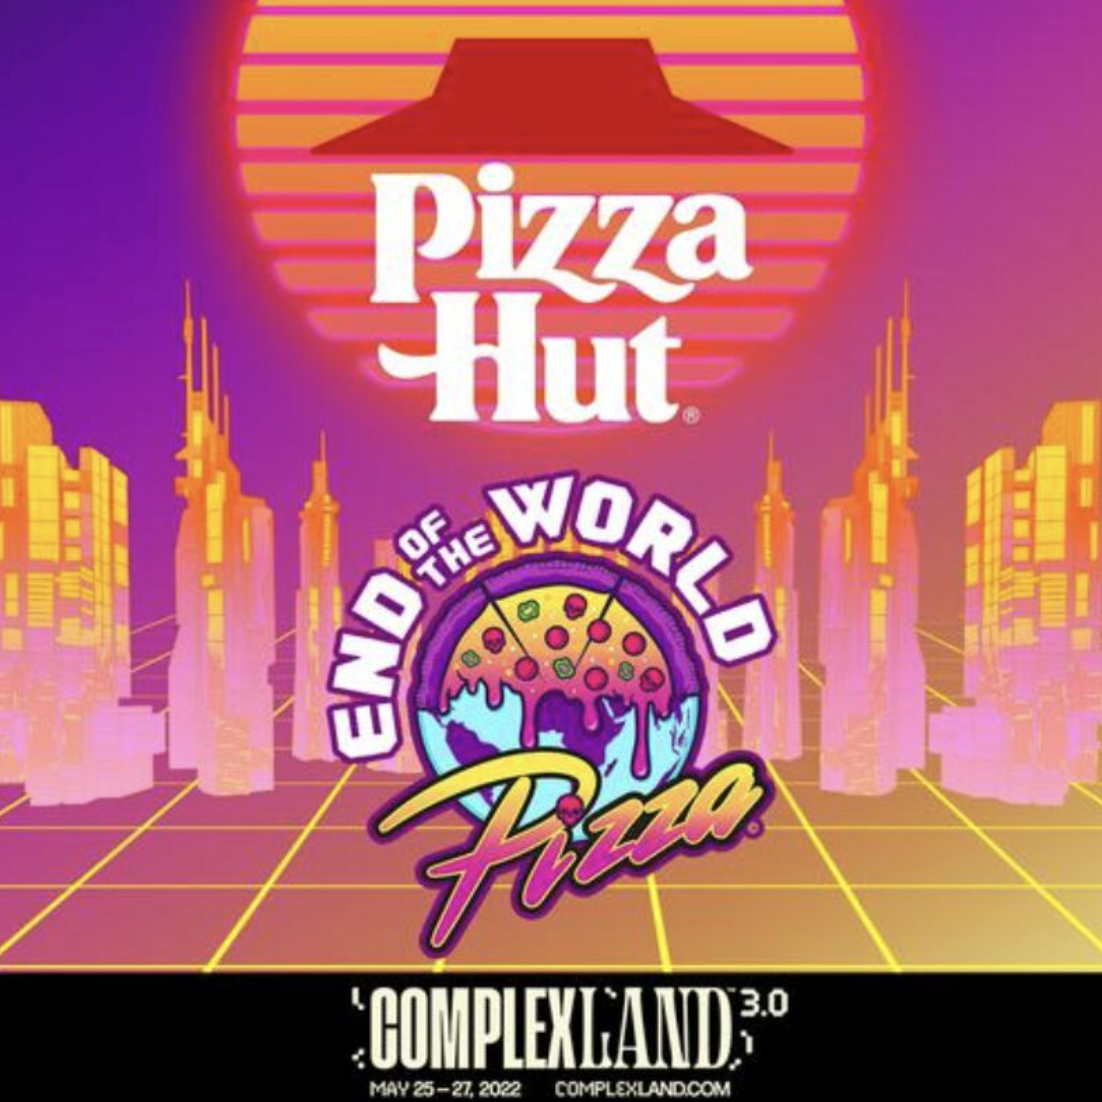 "Pizza Hut Saves Humanity" Campaign Named Winners in The Drum Awards in the "Metaverse: Best Brand Experience" Category